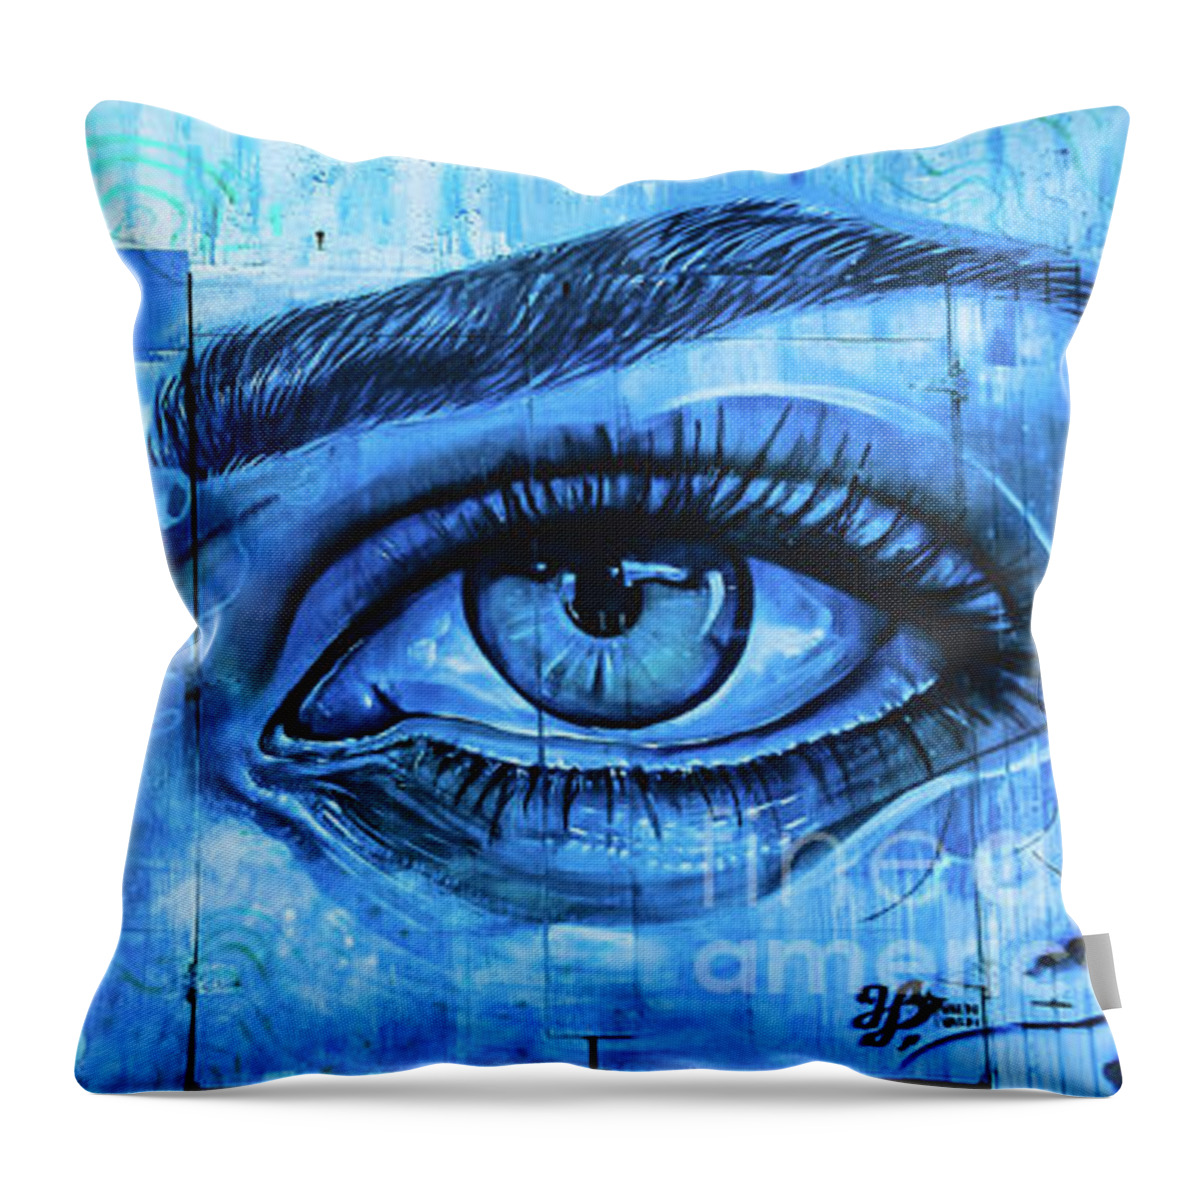 Asbury Park Throw Pillow featuring the photograph Blue Eyes by Colleen Kammerer